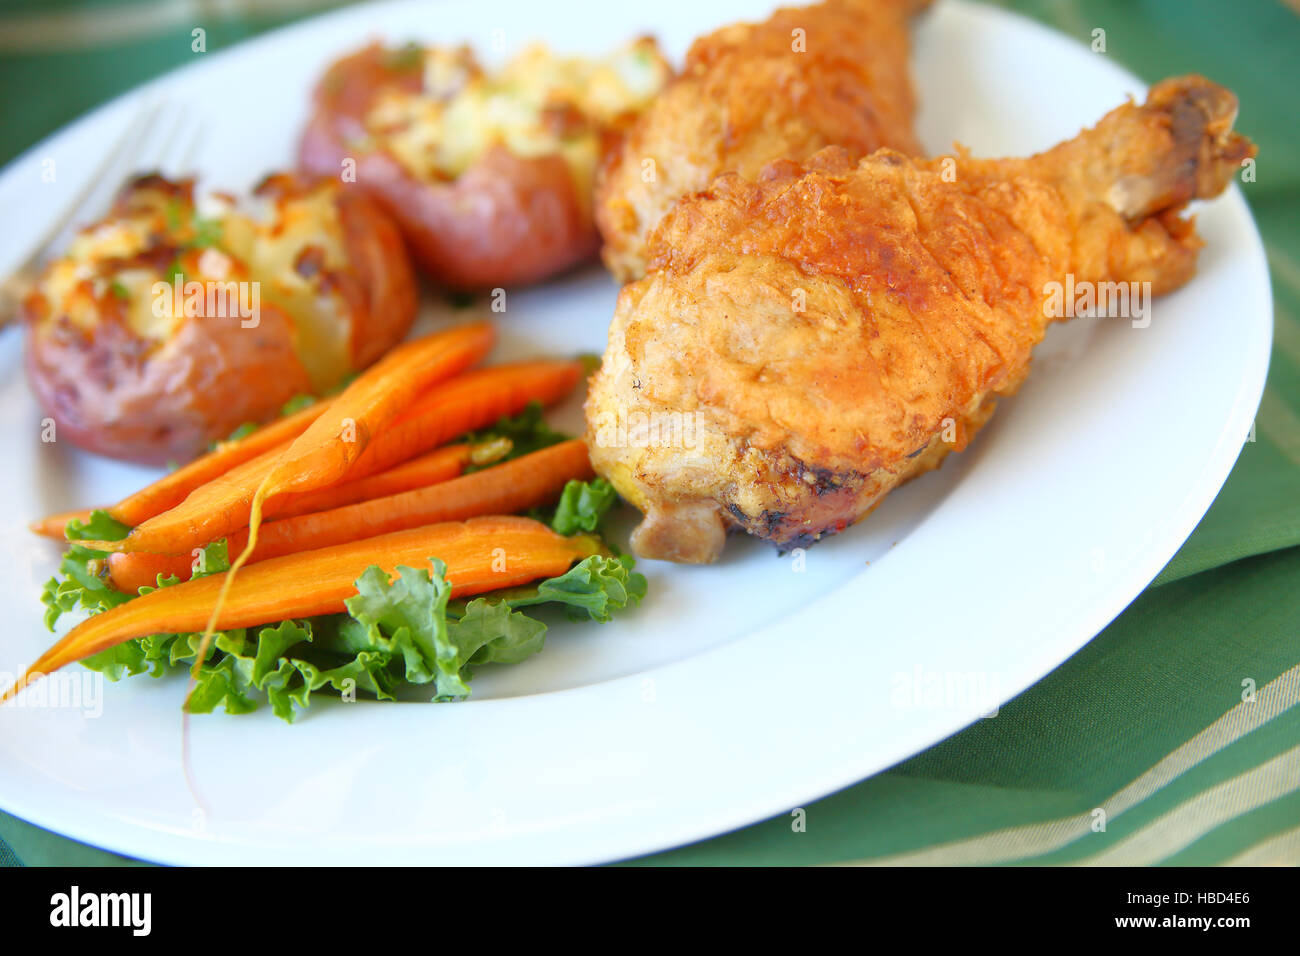 Fried chicken, roasted carrots and crushed potatoes on a white plate with napkin Stock Photo